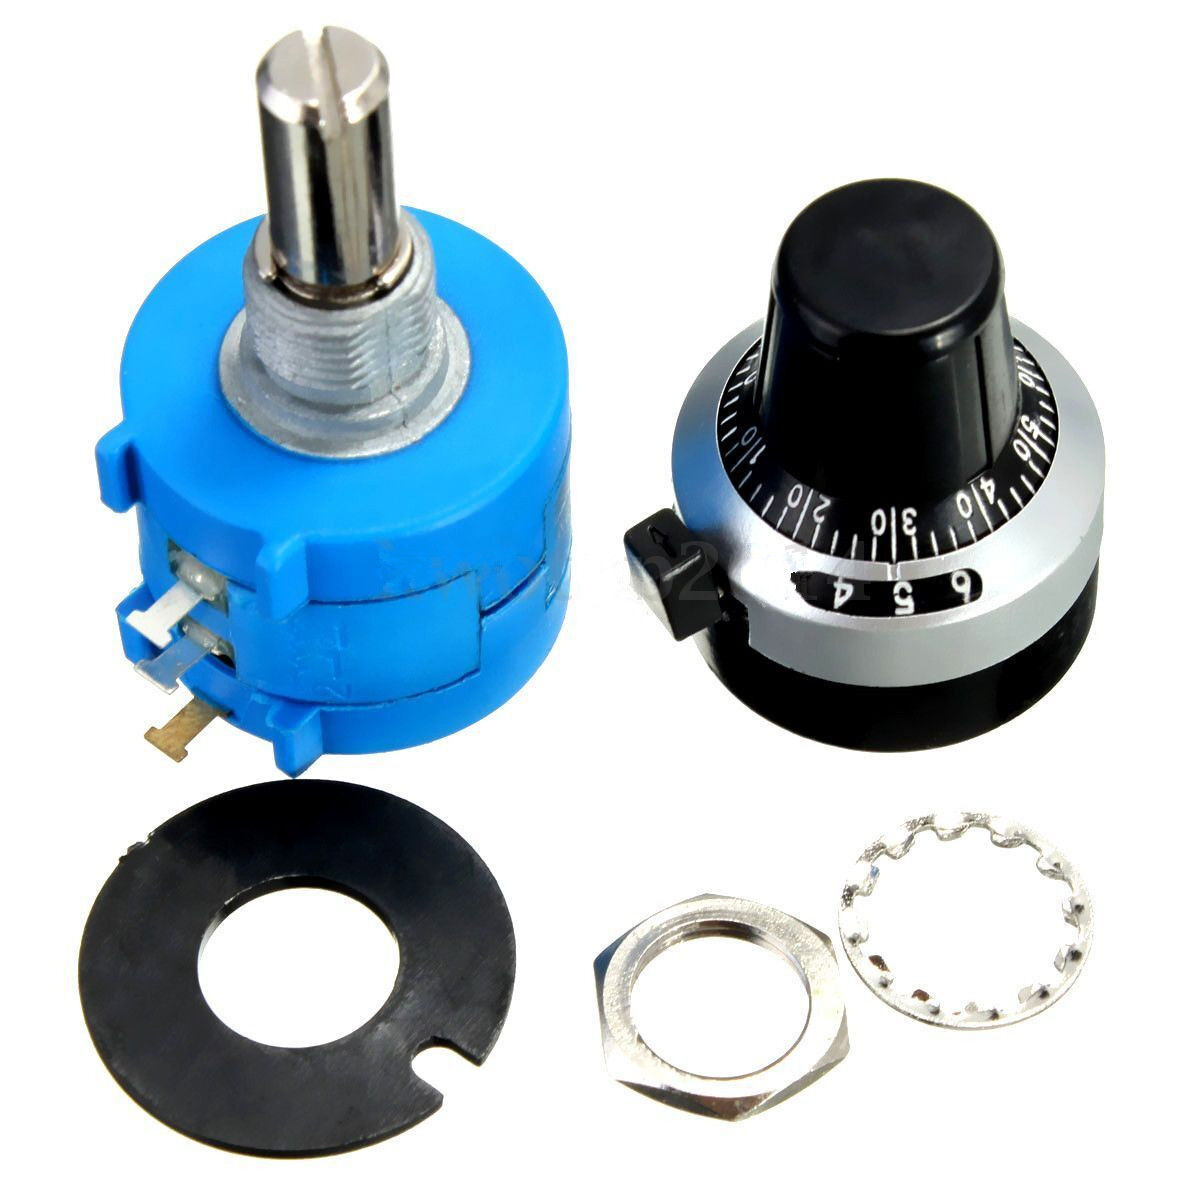 5K It Financial sales sale is very popular Ohm 3590S-2-502L Potentiometer With Turn Counting Dial 10 Rot